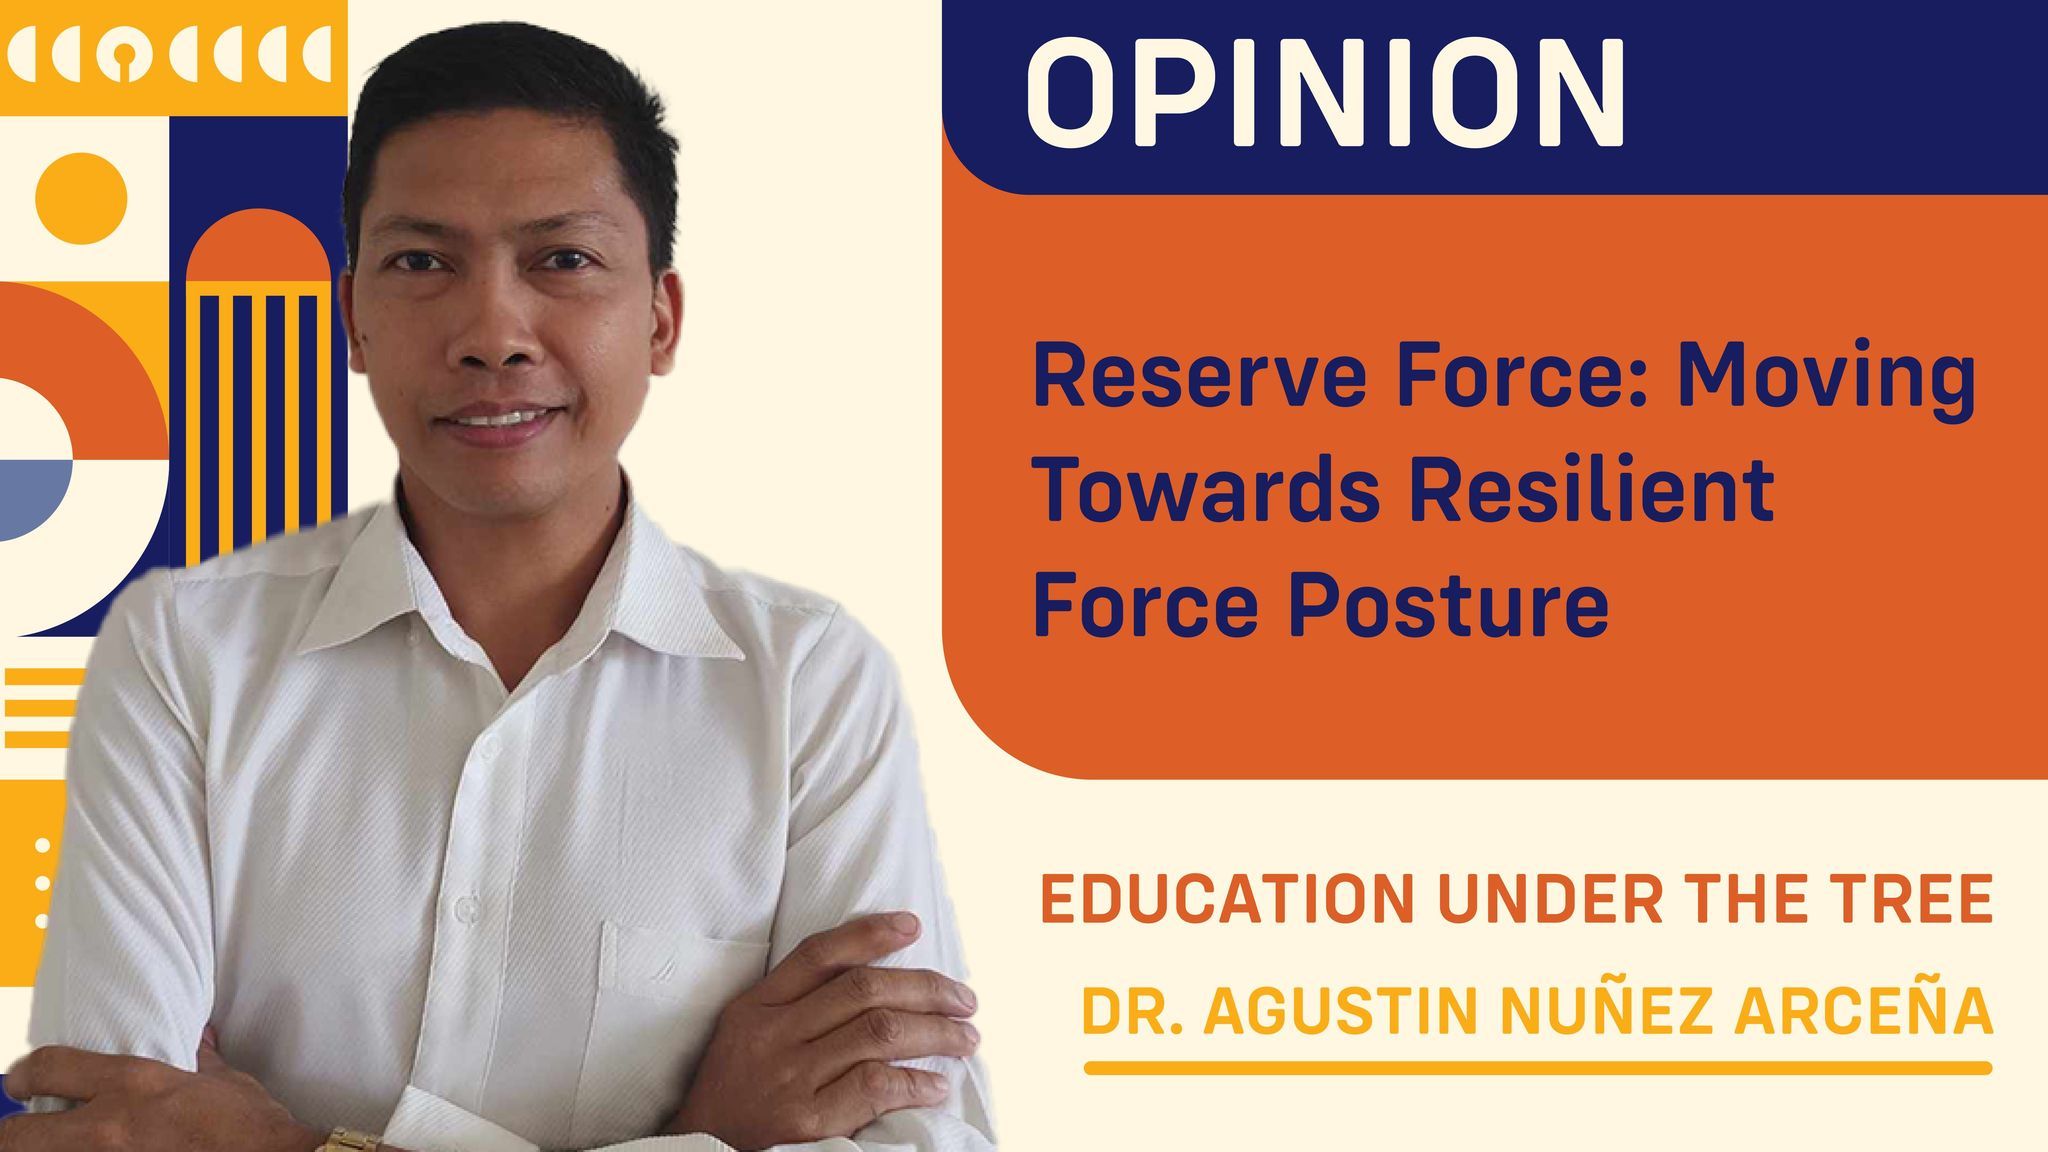 Reserve Force: Moving Towards Resilient Force Posture